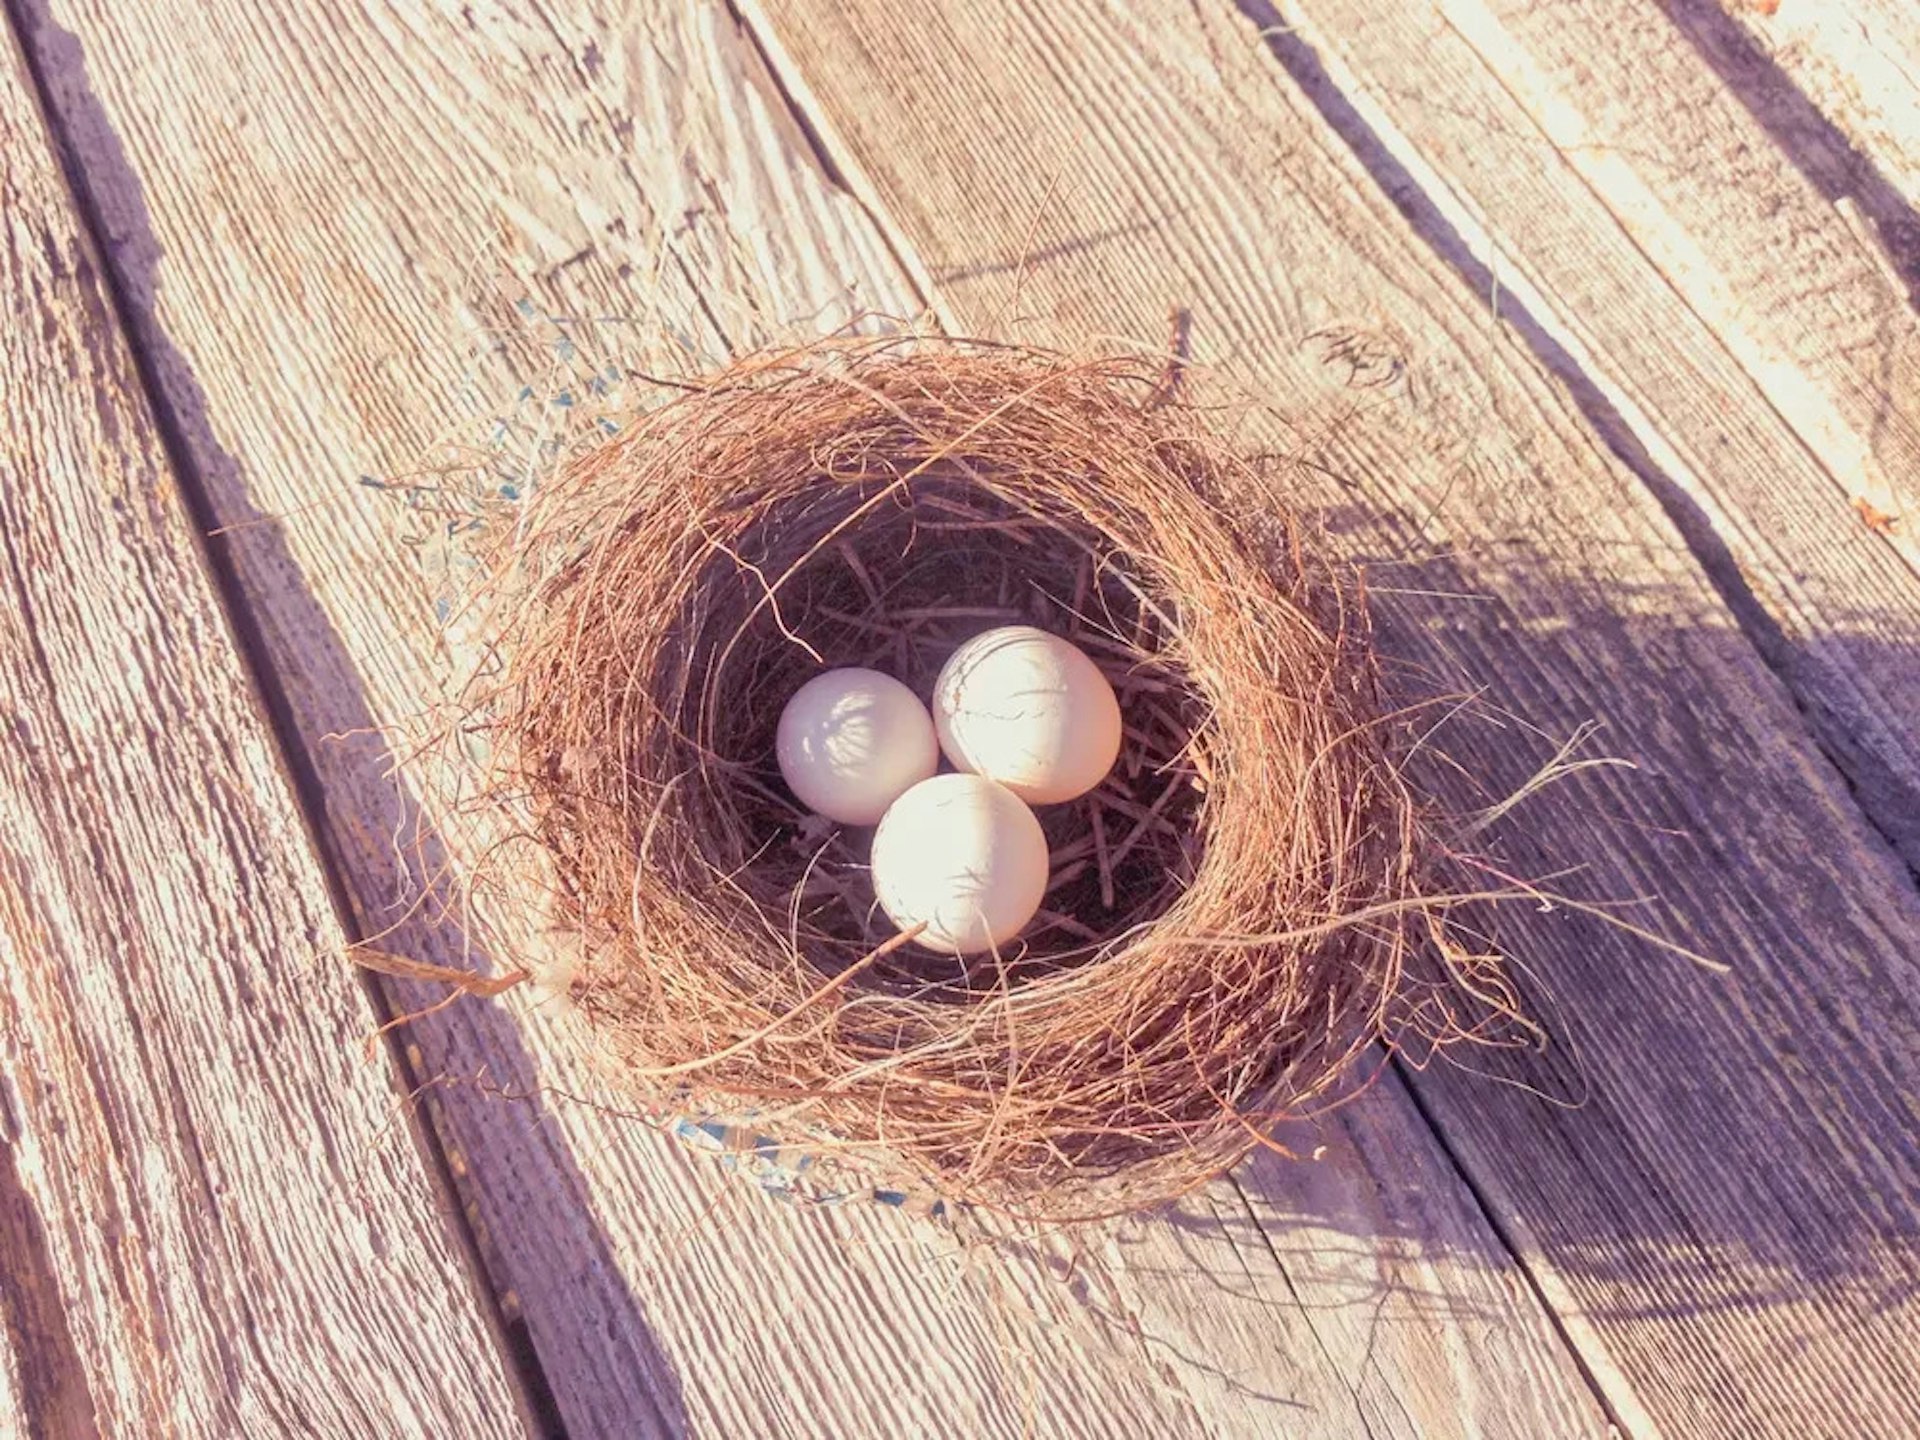 A bird’s nest with three white eggs in it.